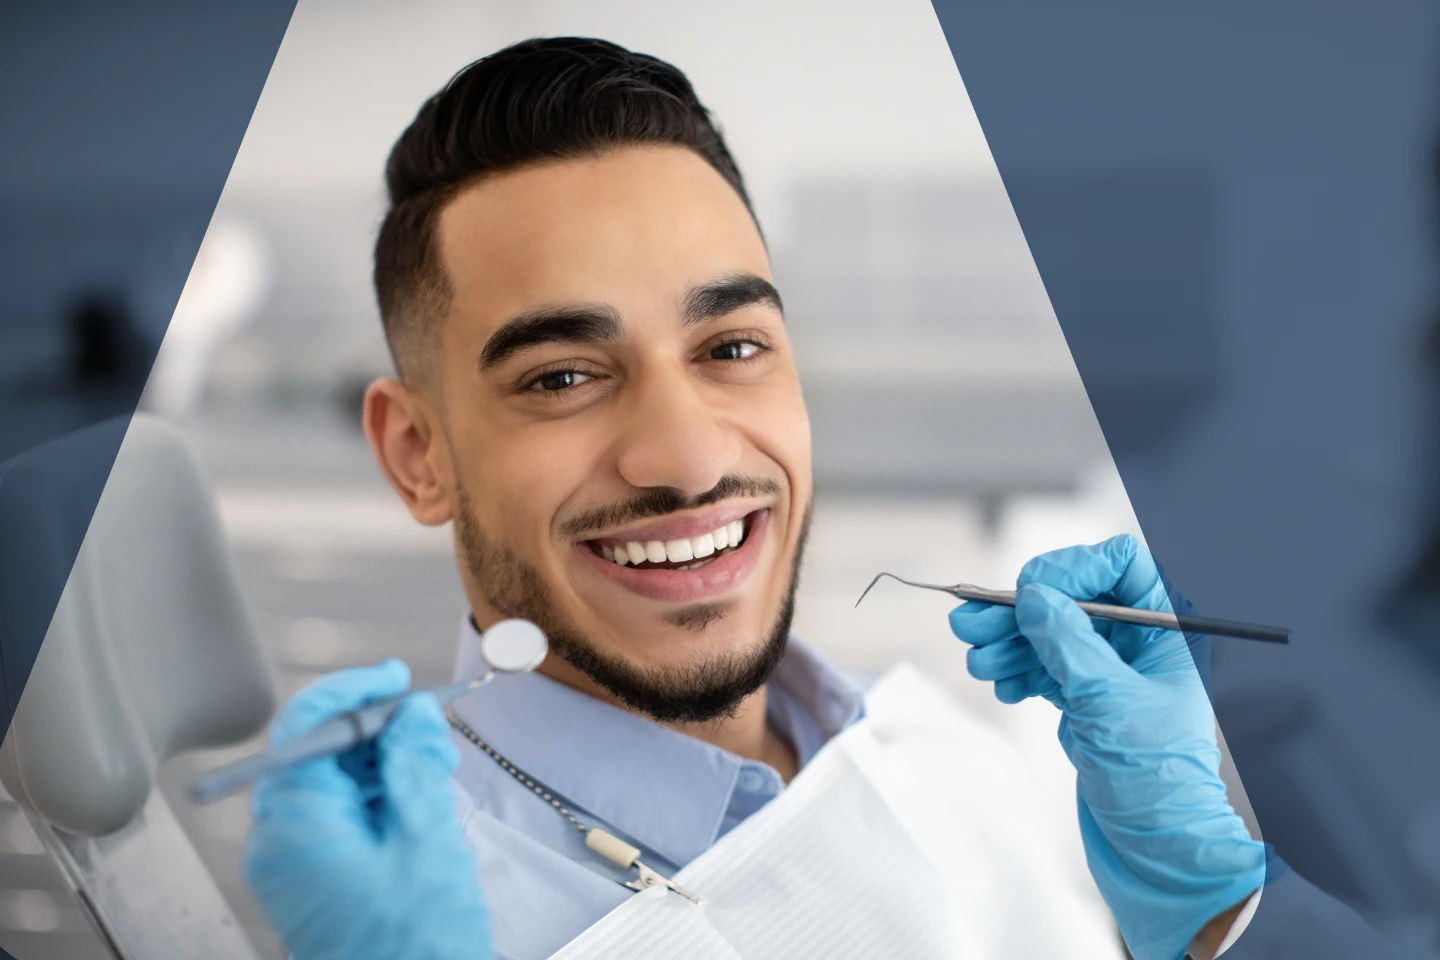 Restorative dental treatments and procedures are designed to repair and restore damaged, decayed, or missing teeth. These procedures not only improve the appearance of your smile but also help to ensure good dental health and overall well-being.